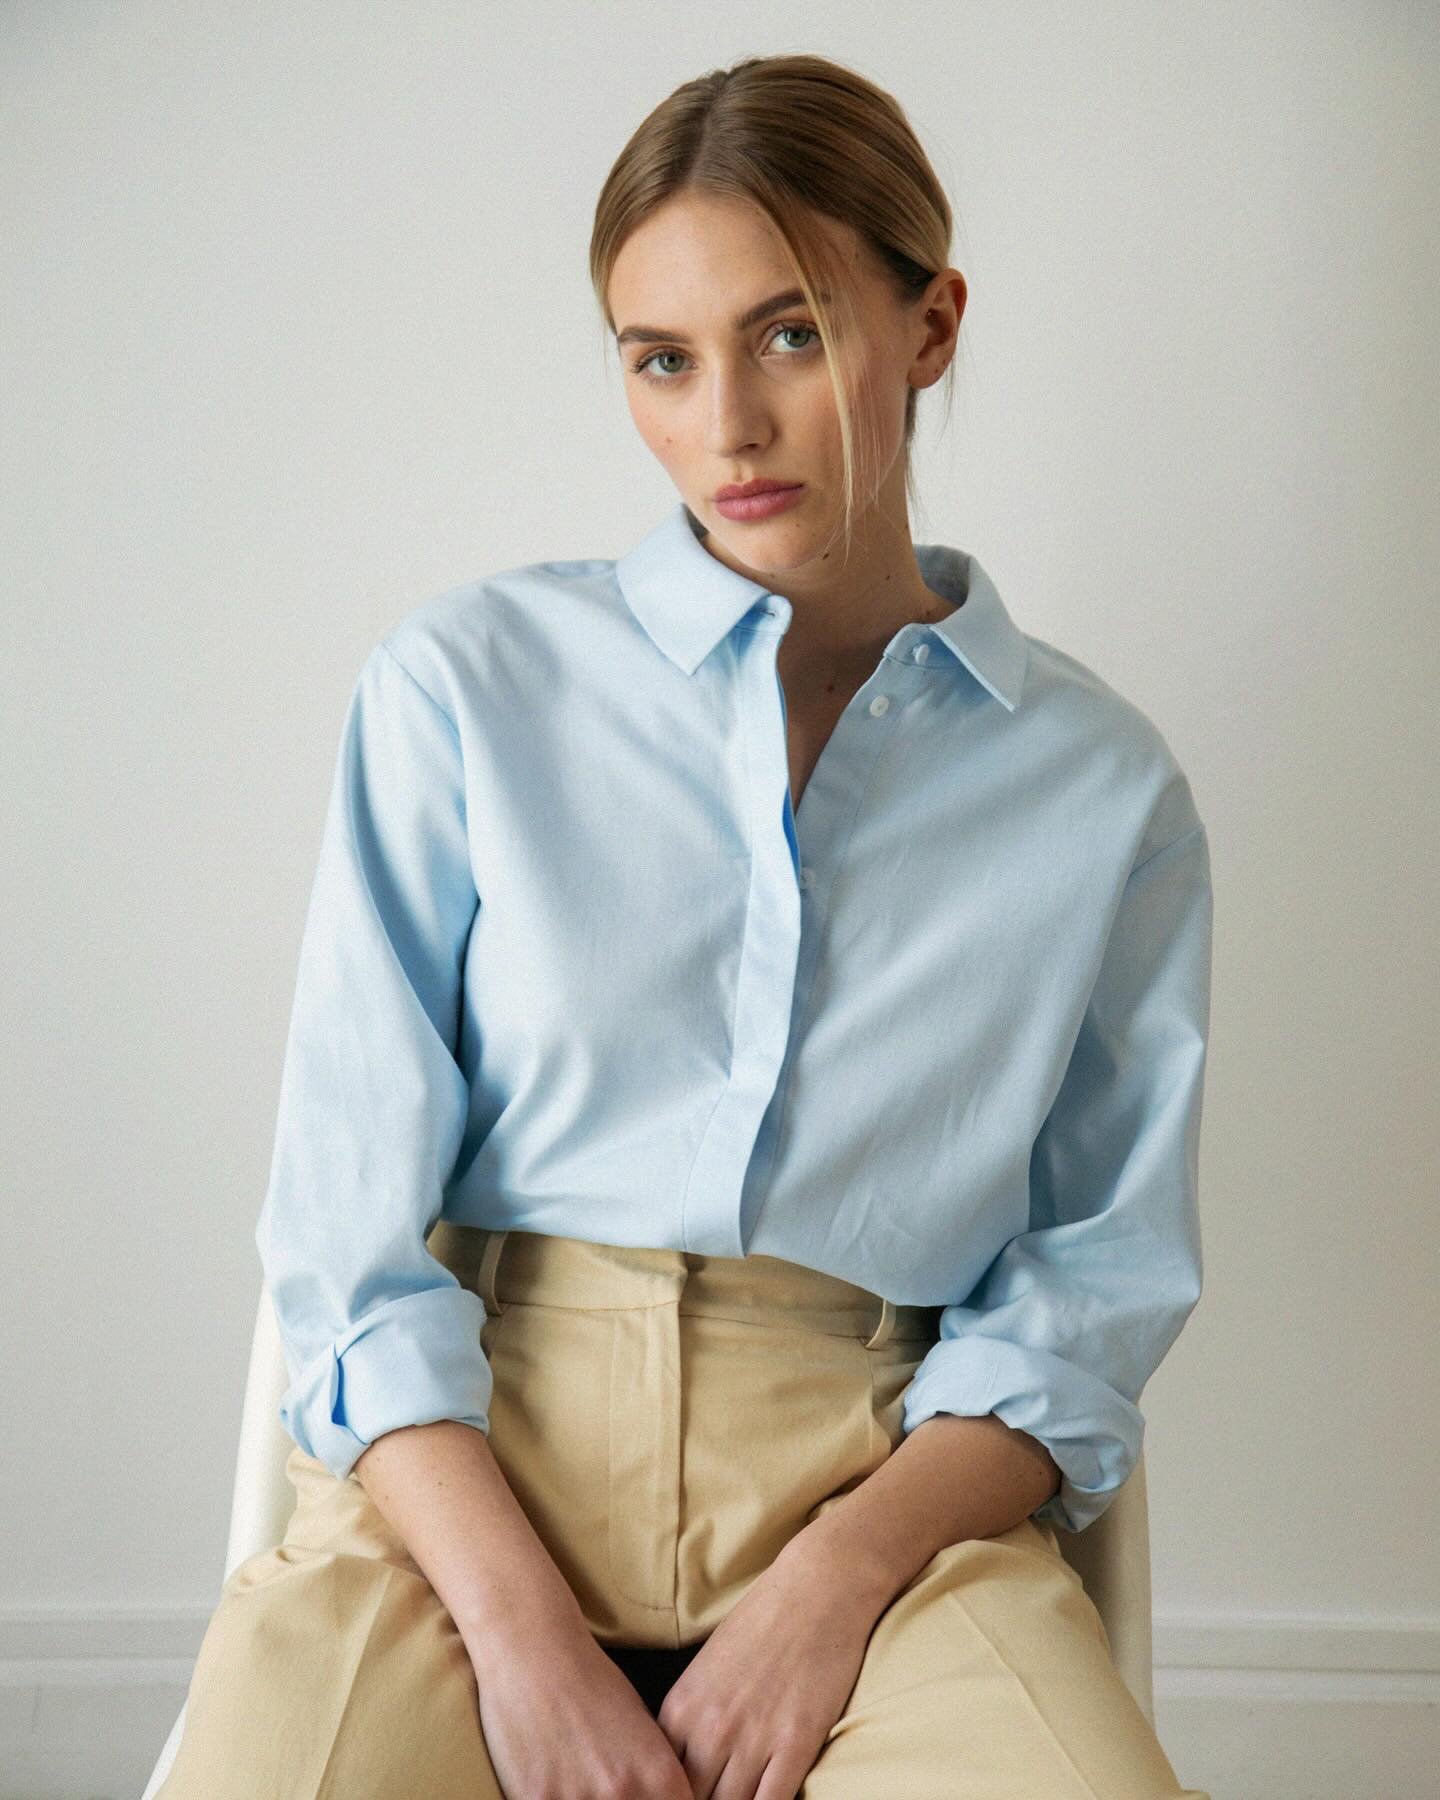 LE SEVRAN
Organic Cotton

We aim at creating timeless pieces, so our collections cater more to enduring style over passing trends, and still remain so desirable. In our wardrobe, we already had the boyfriend shirt, the preppy shirt, the oversized shi